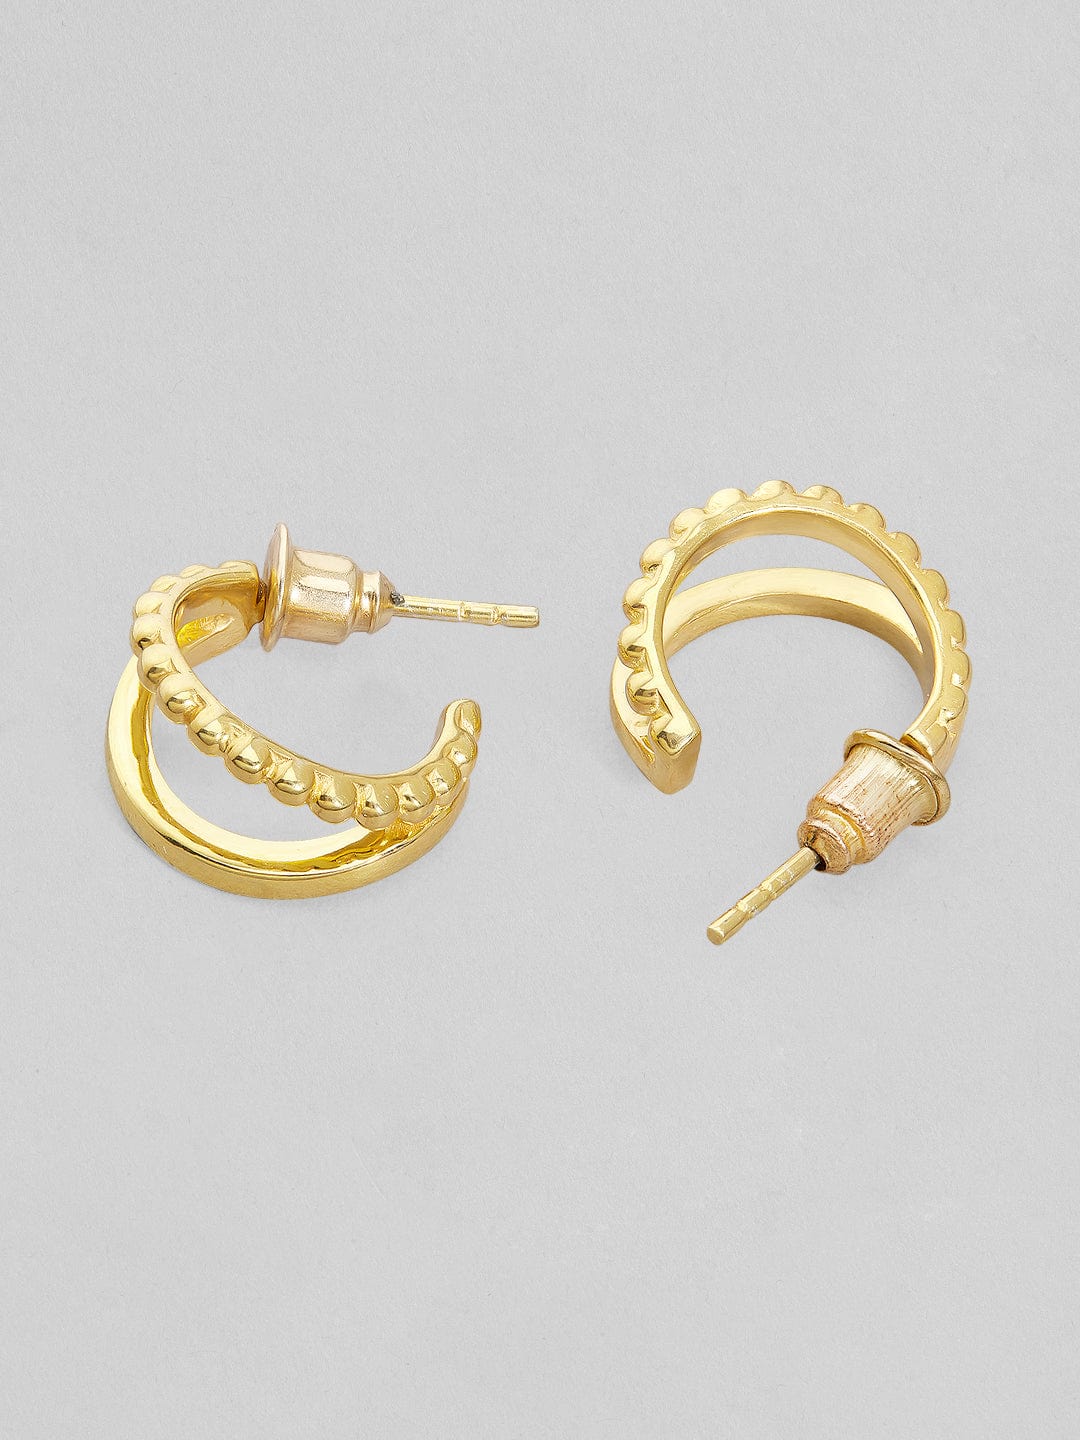 Rubans 925 Silver Knotted And Plated Elegant Hoop Earrings. - Gold Plated Earrings